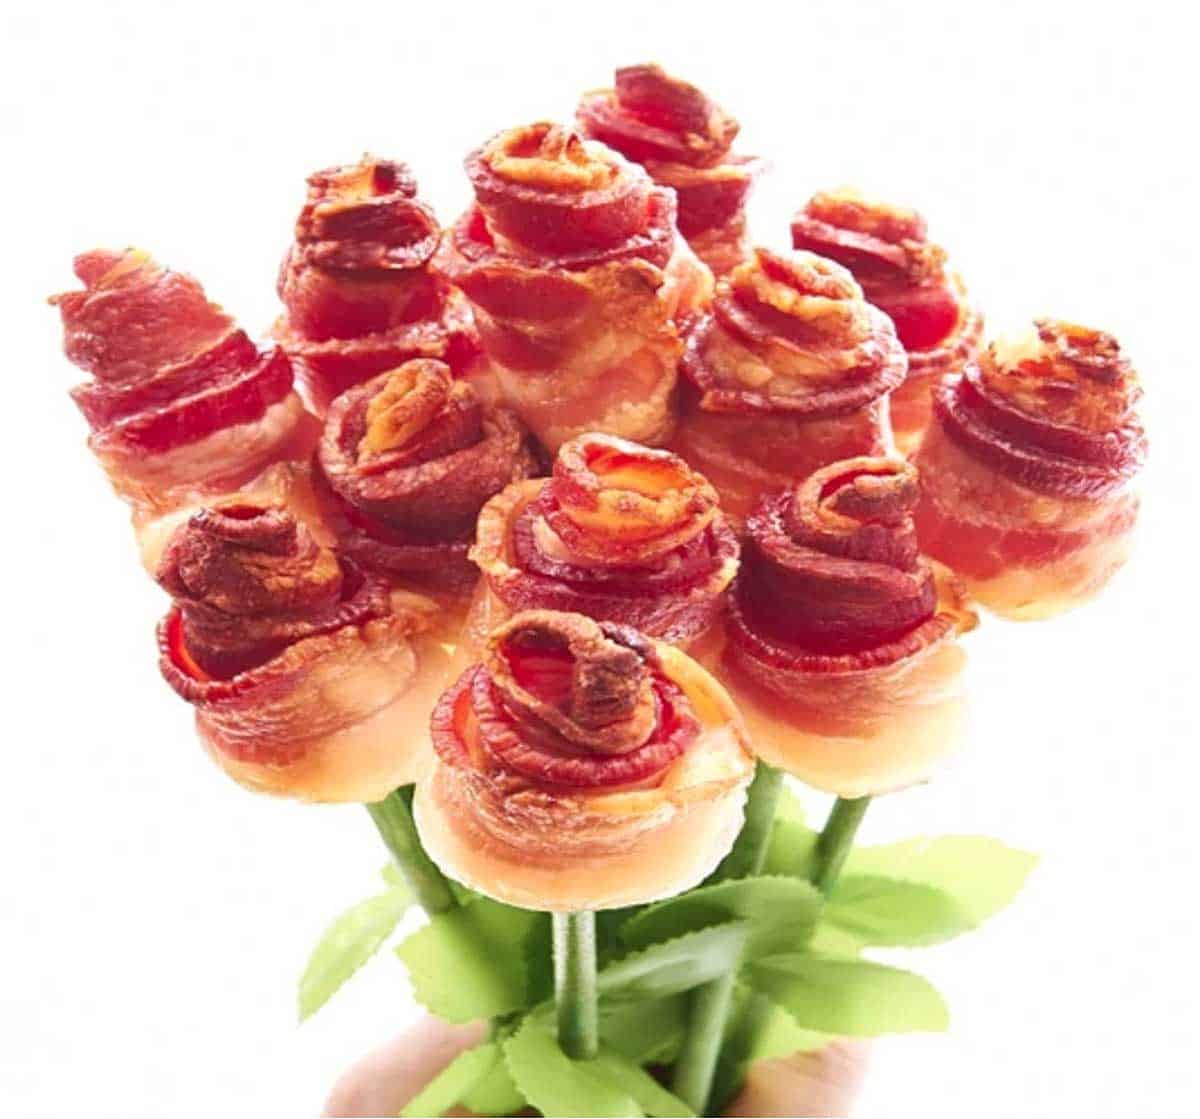 A bouquet with 12 roses, each made from a strip of bacon wound in a rose shape. 